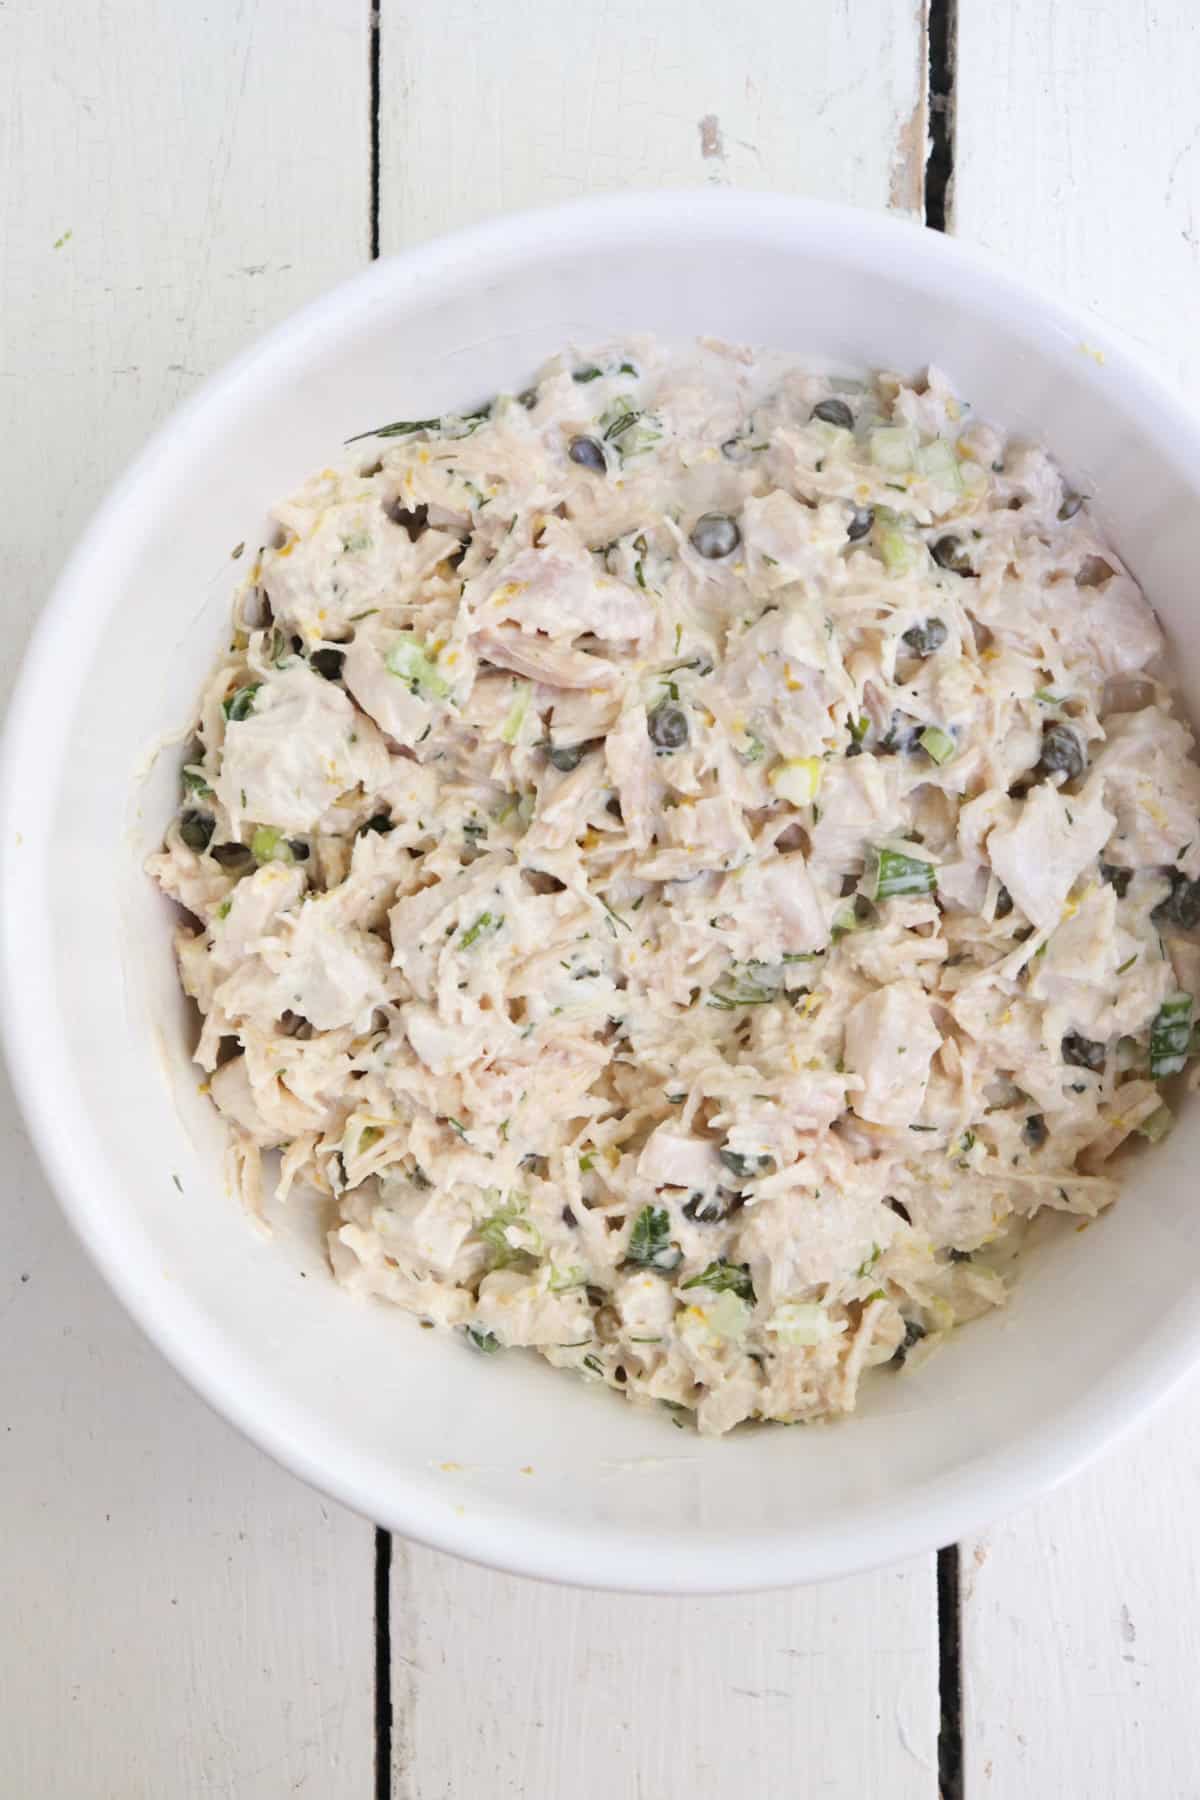 caper chicken salad mixed in a white bowl.